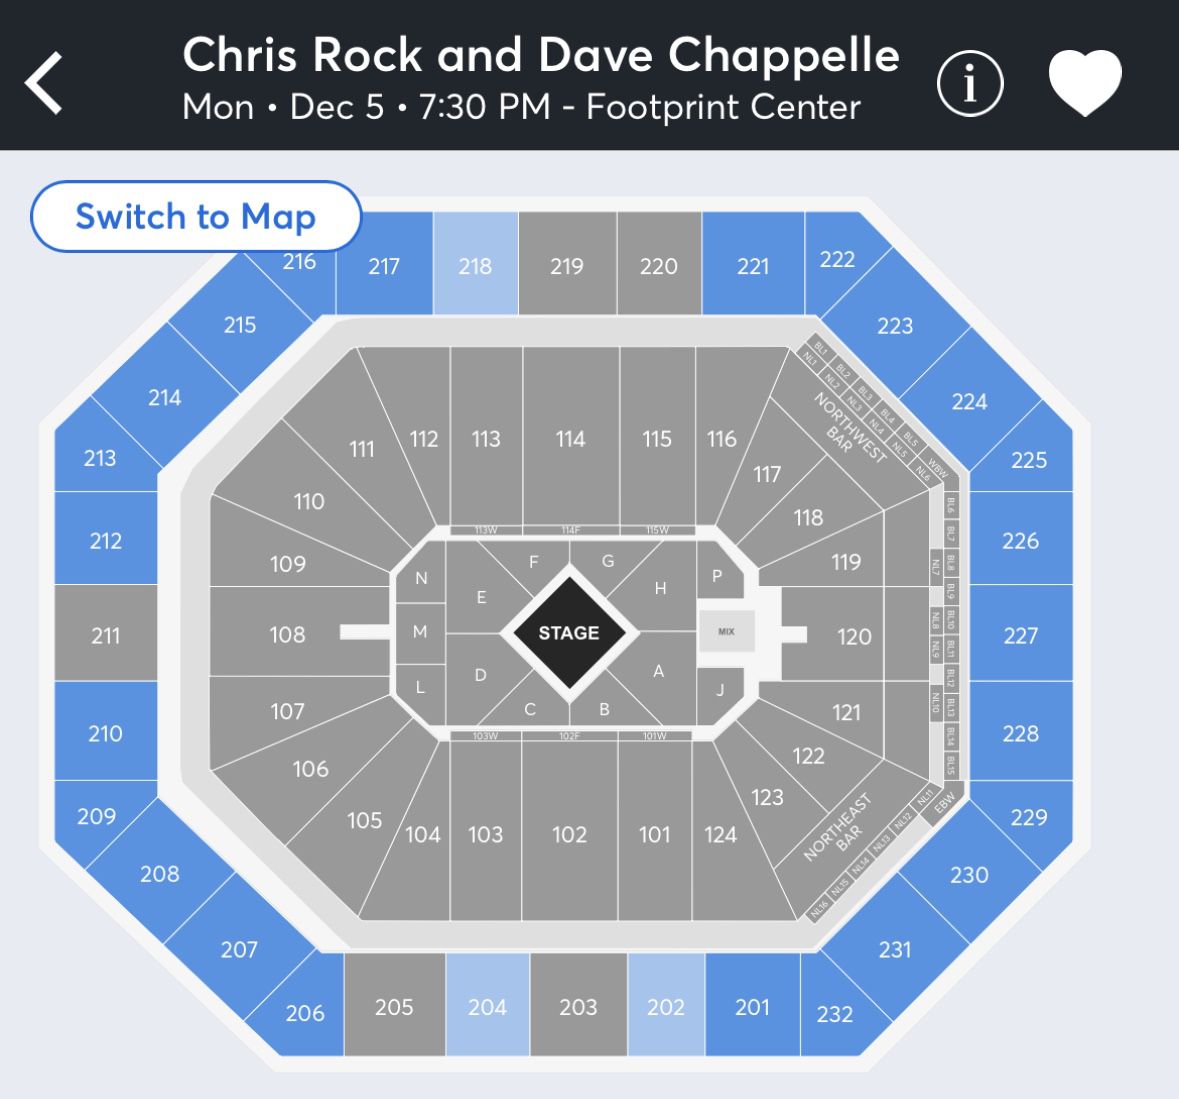 Chris Rock and Dave Chappelle Footprint center $350 Each